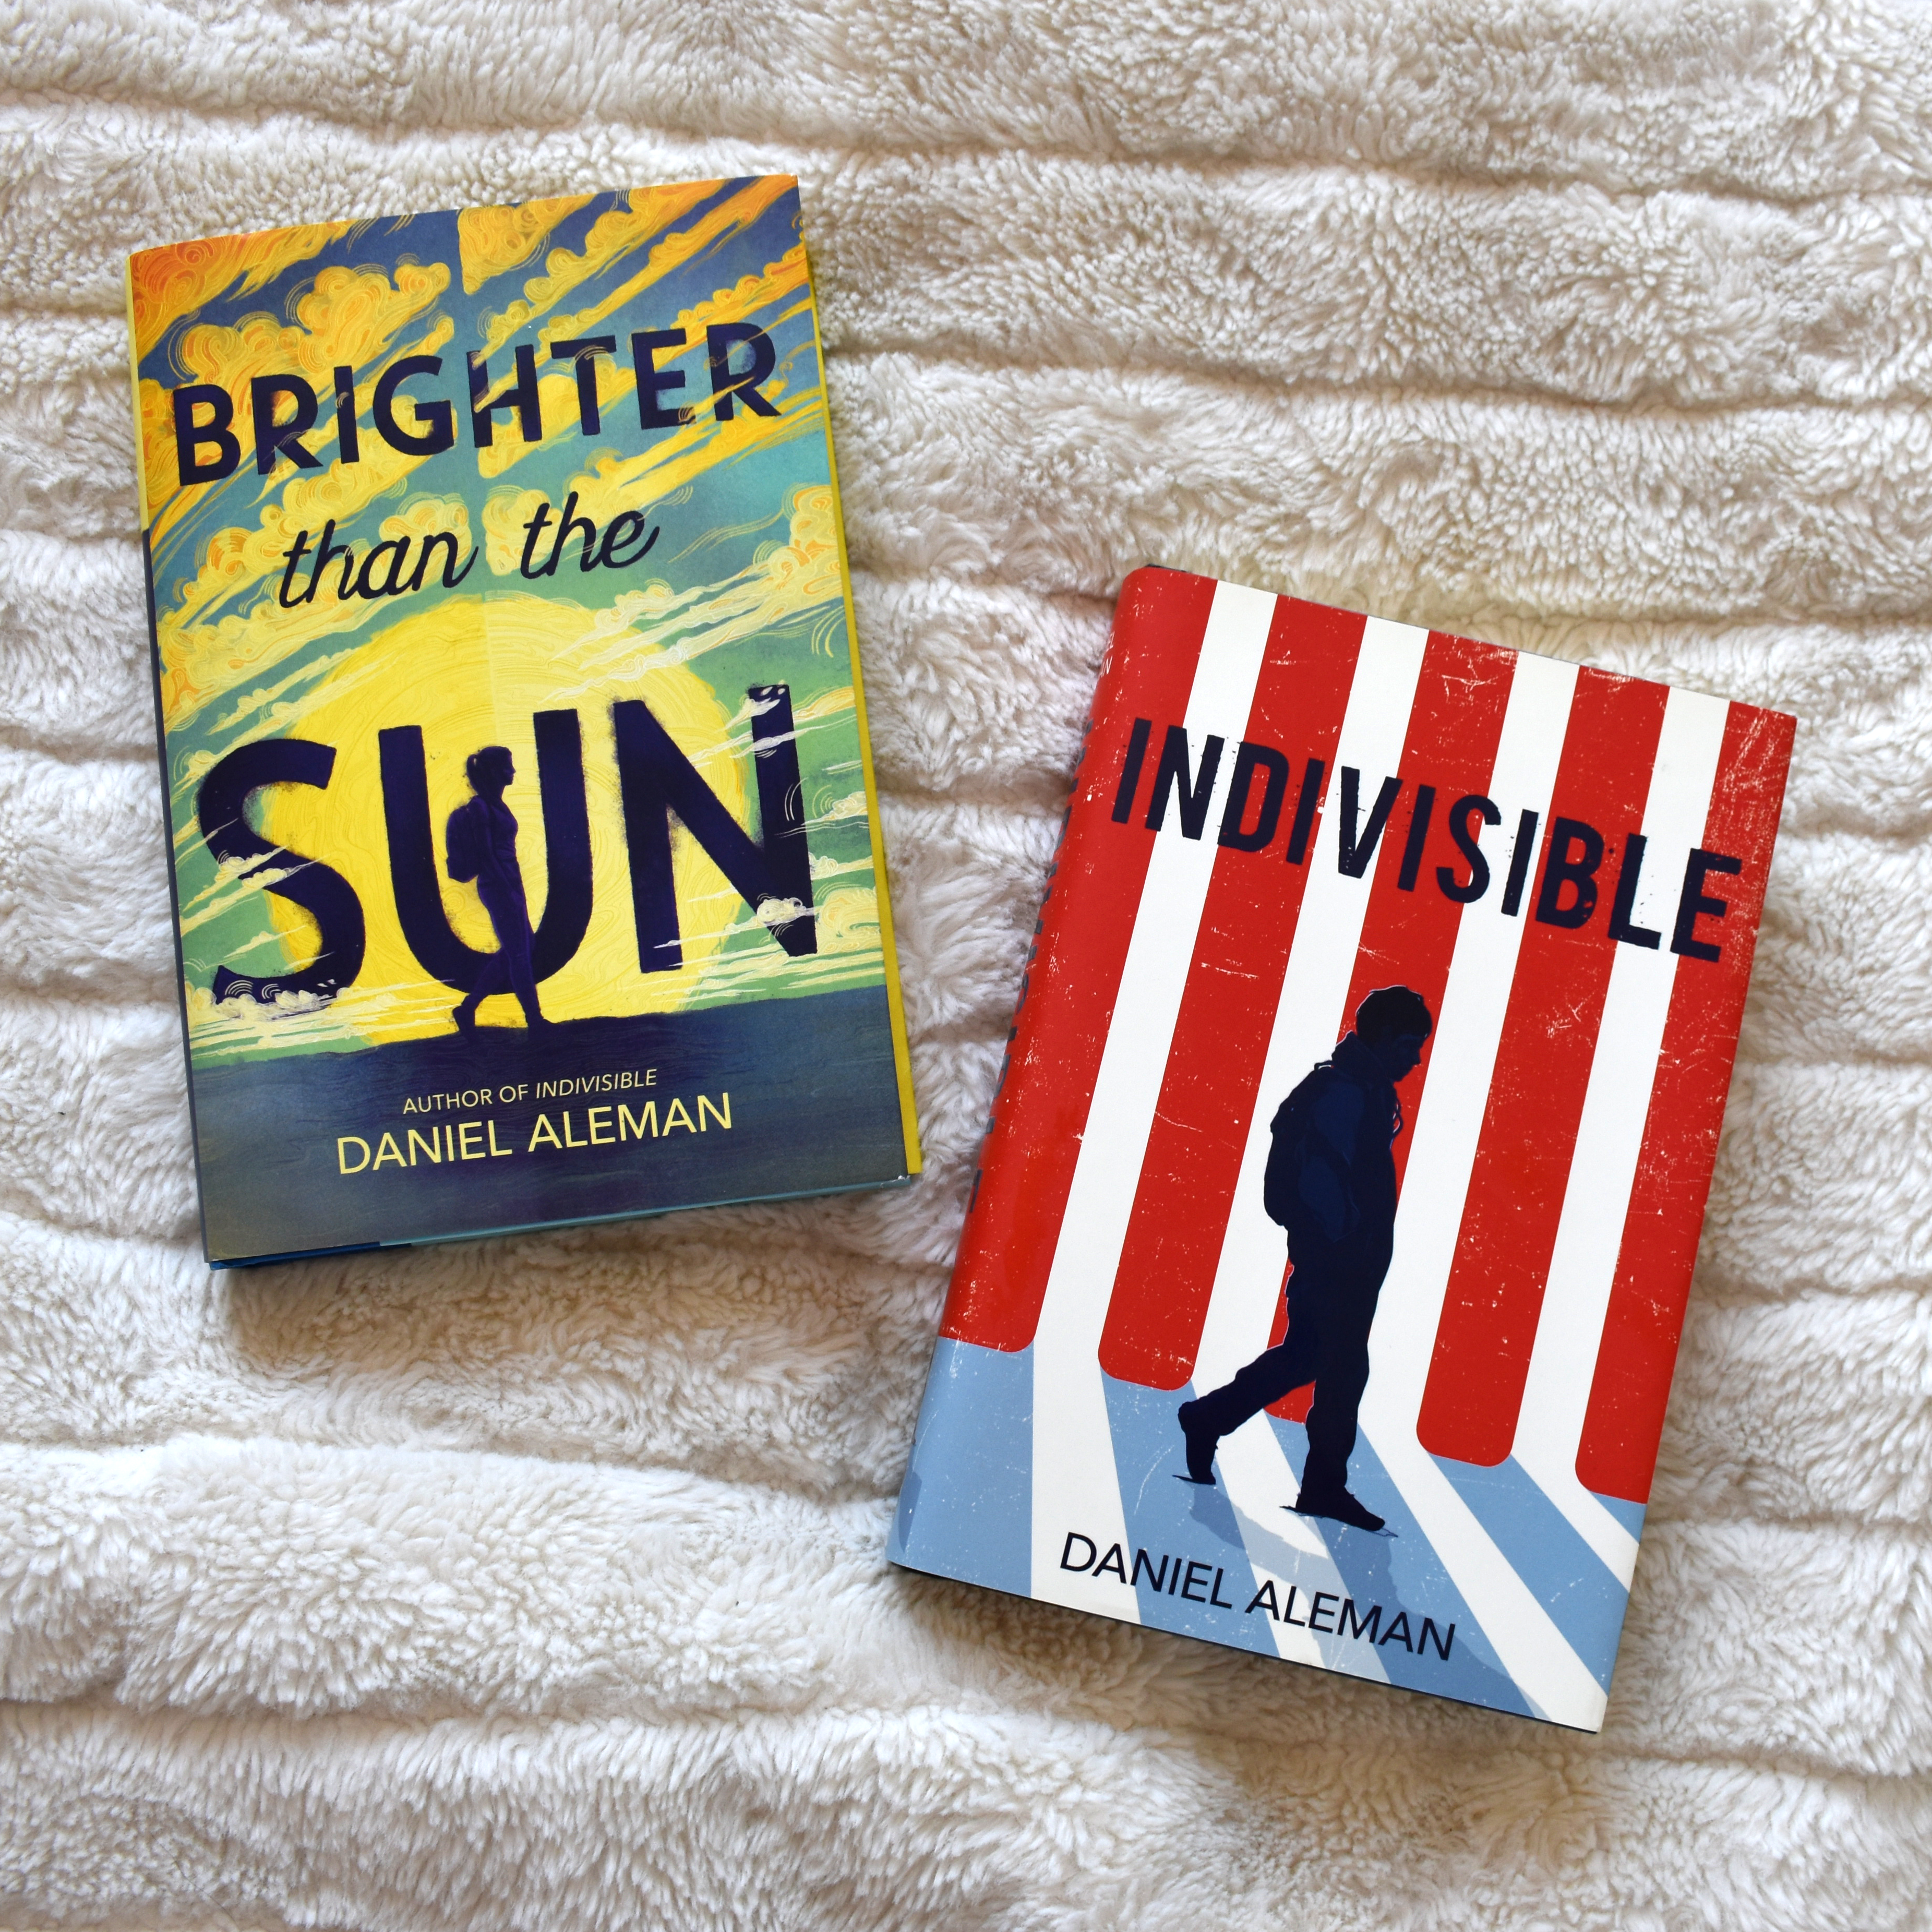 Instagram image of the books "Brighter than the Sun" and "Indivisible" by Daniel Aleman